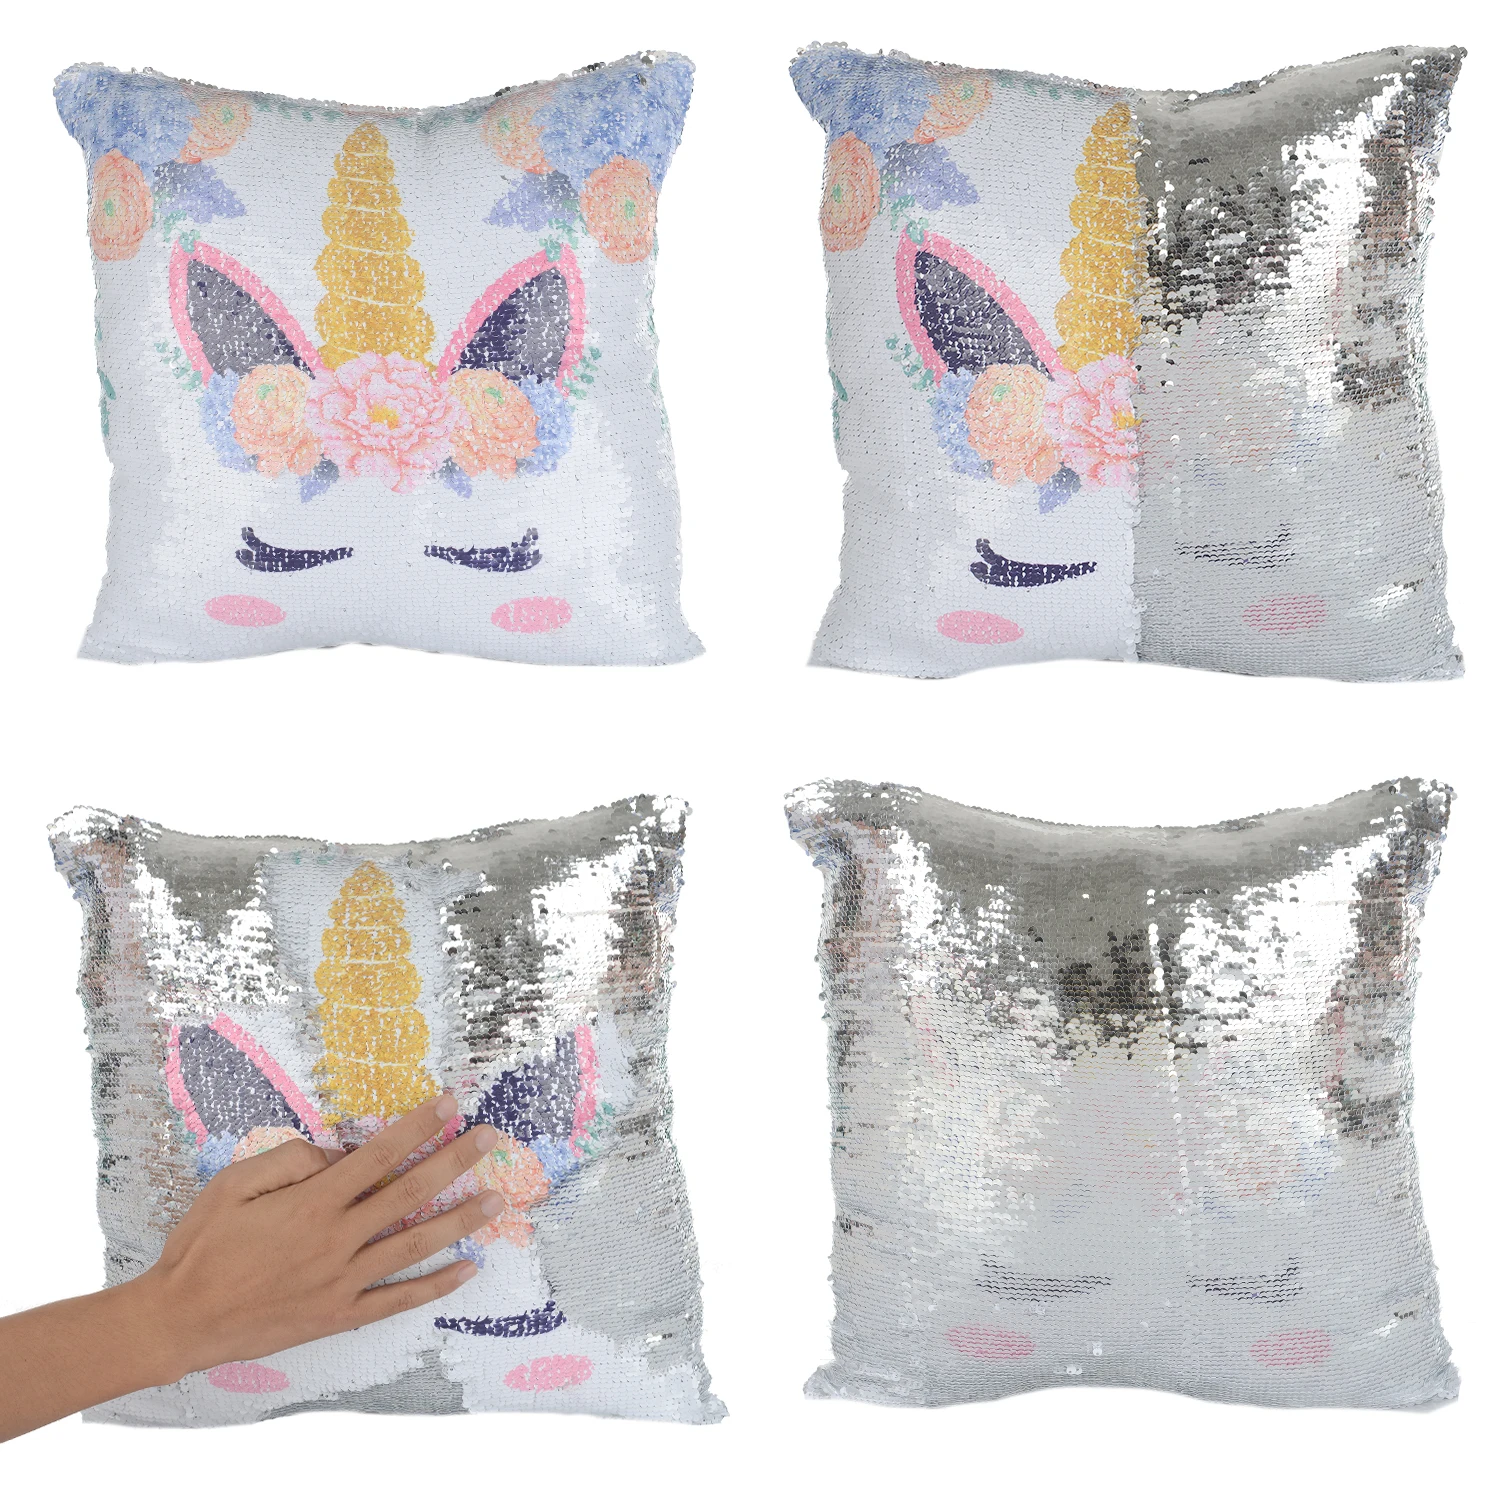 Magical Unicorn Mermaid Cushion Cover with Sequins Reversible Color Changing Pillow Case for Seat Car | Дом и сад